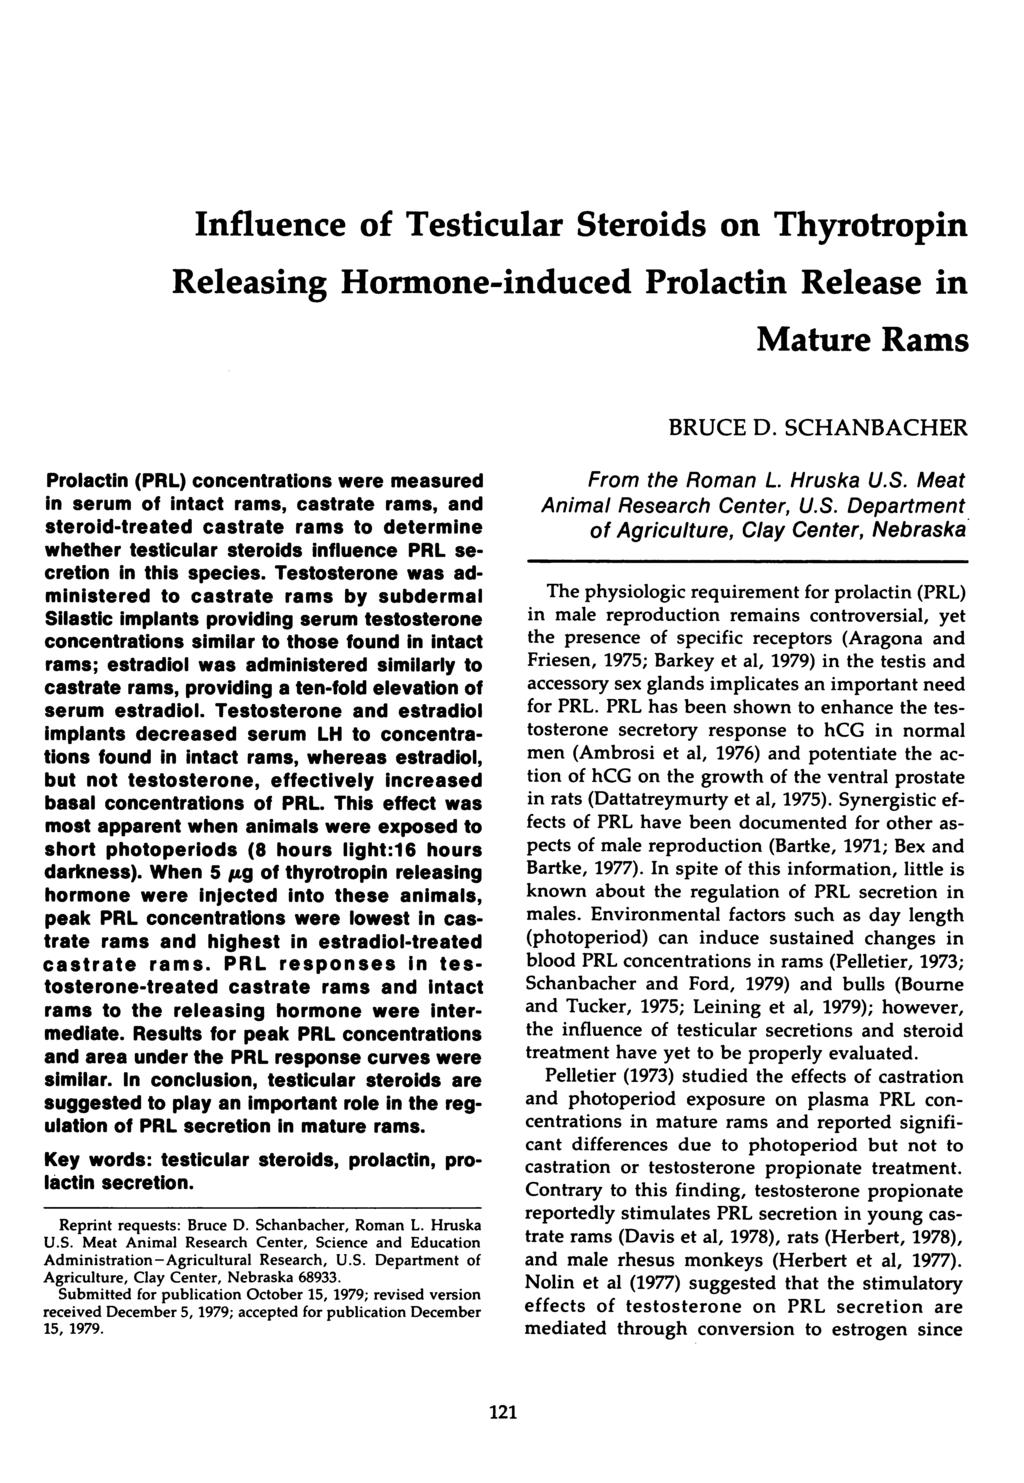 Influence of Testicular Steroids on Thyrotropin Releasing Hormone-induced Prolactin Release in Mature Rams BRUCE D.